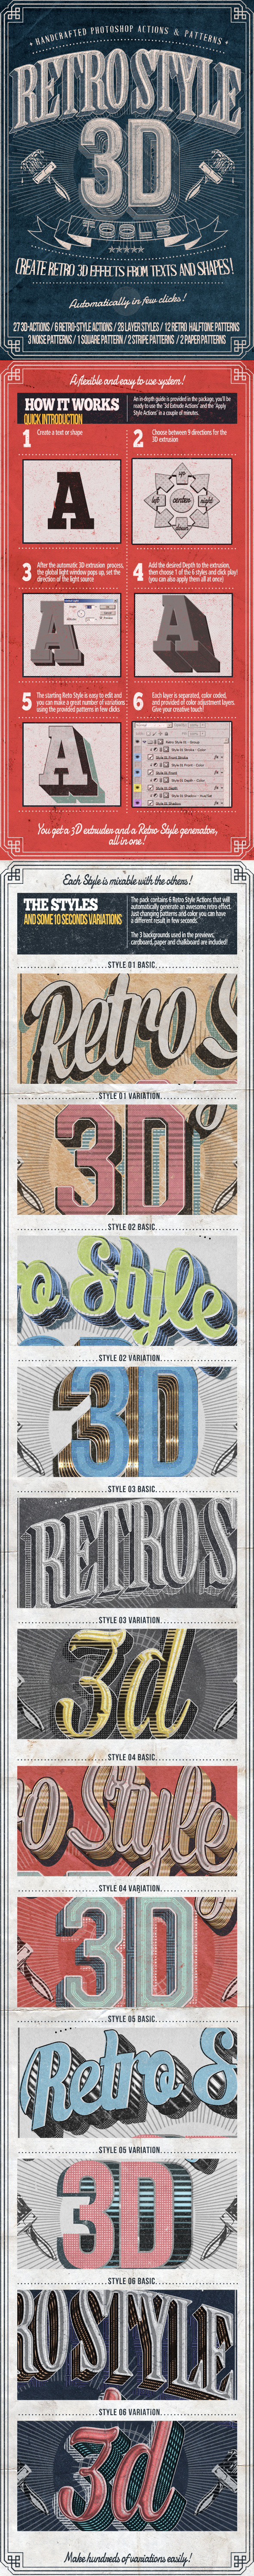 Retro Style 3D Tools – Photoshop Actions #retro #vintage #poster #3d #typography